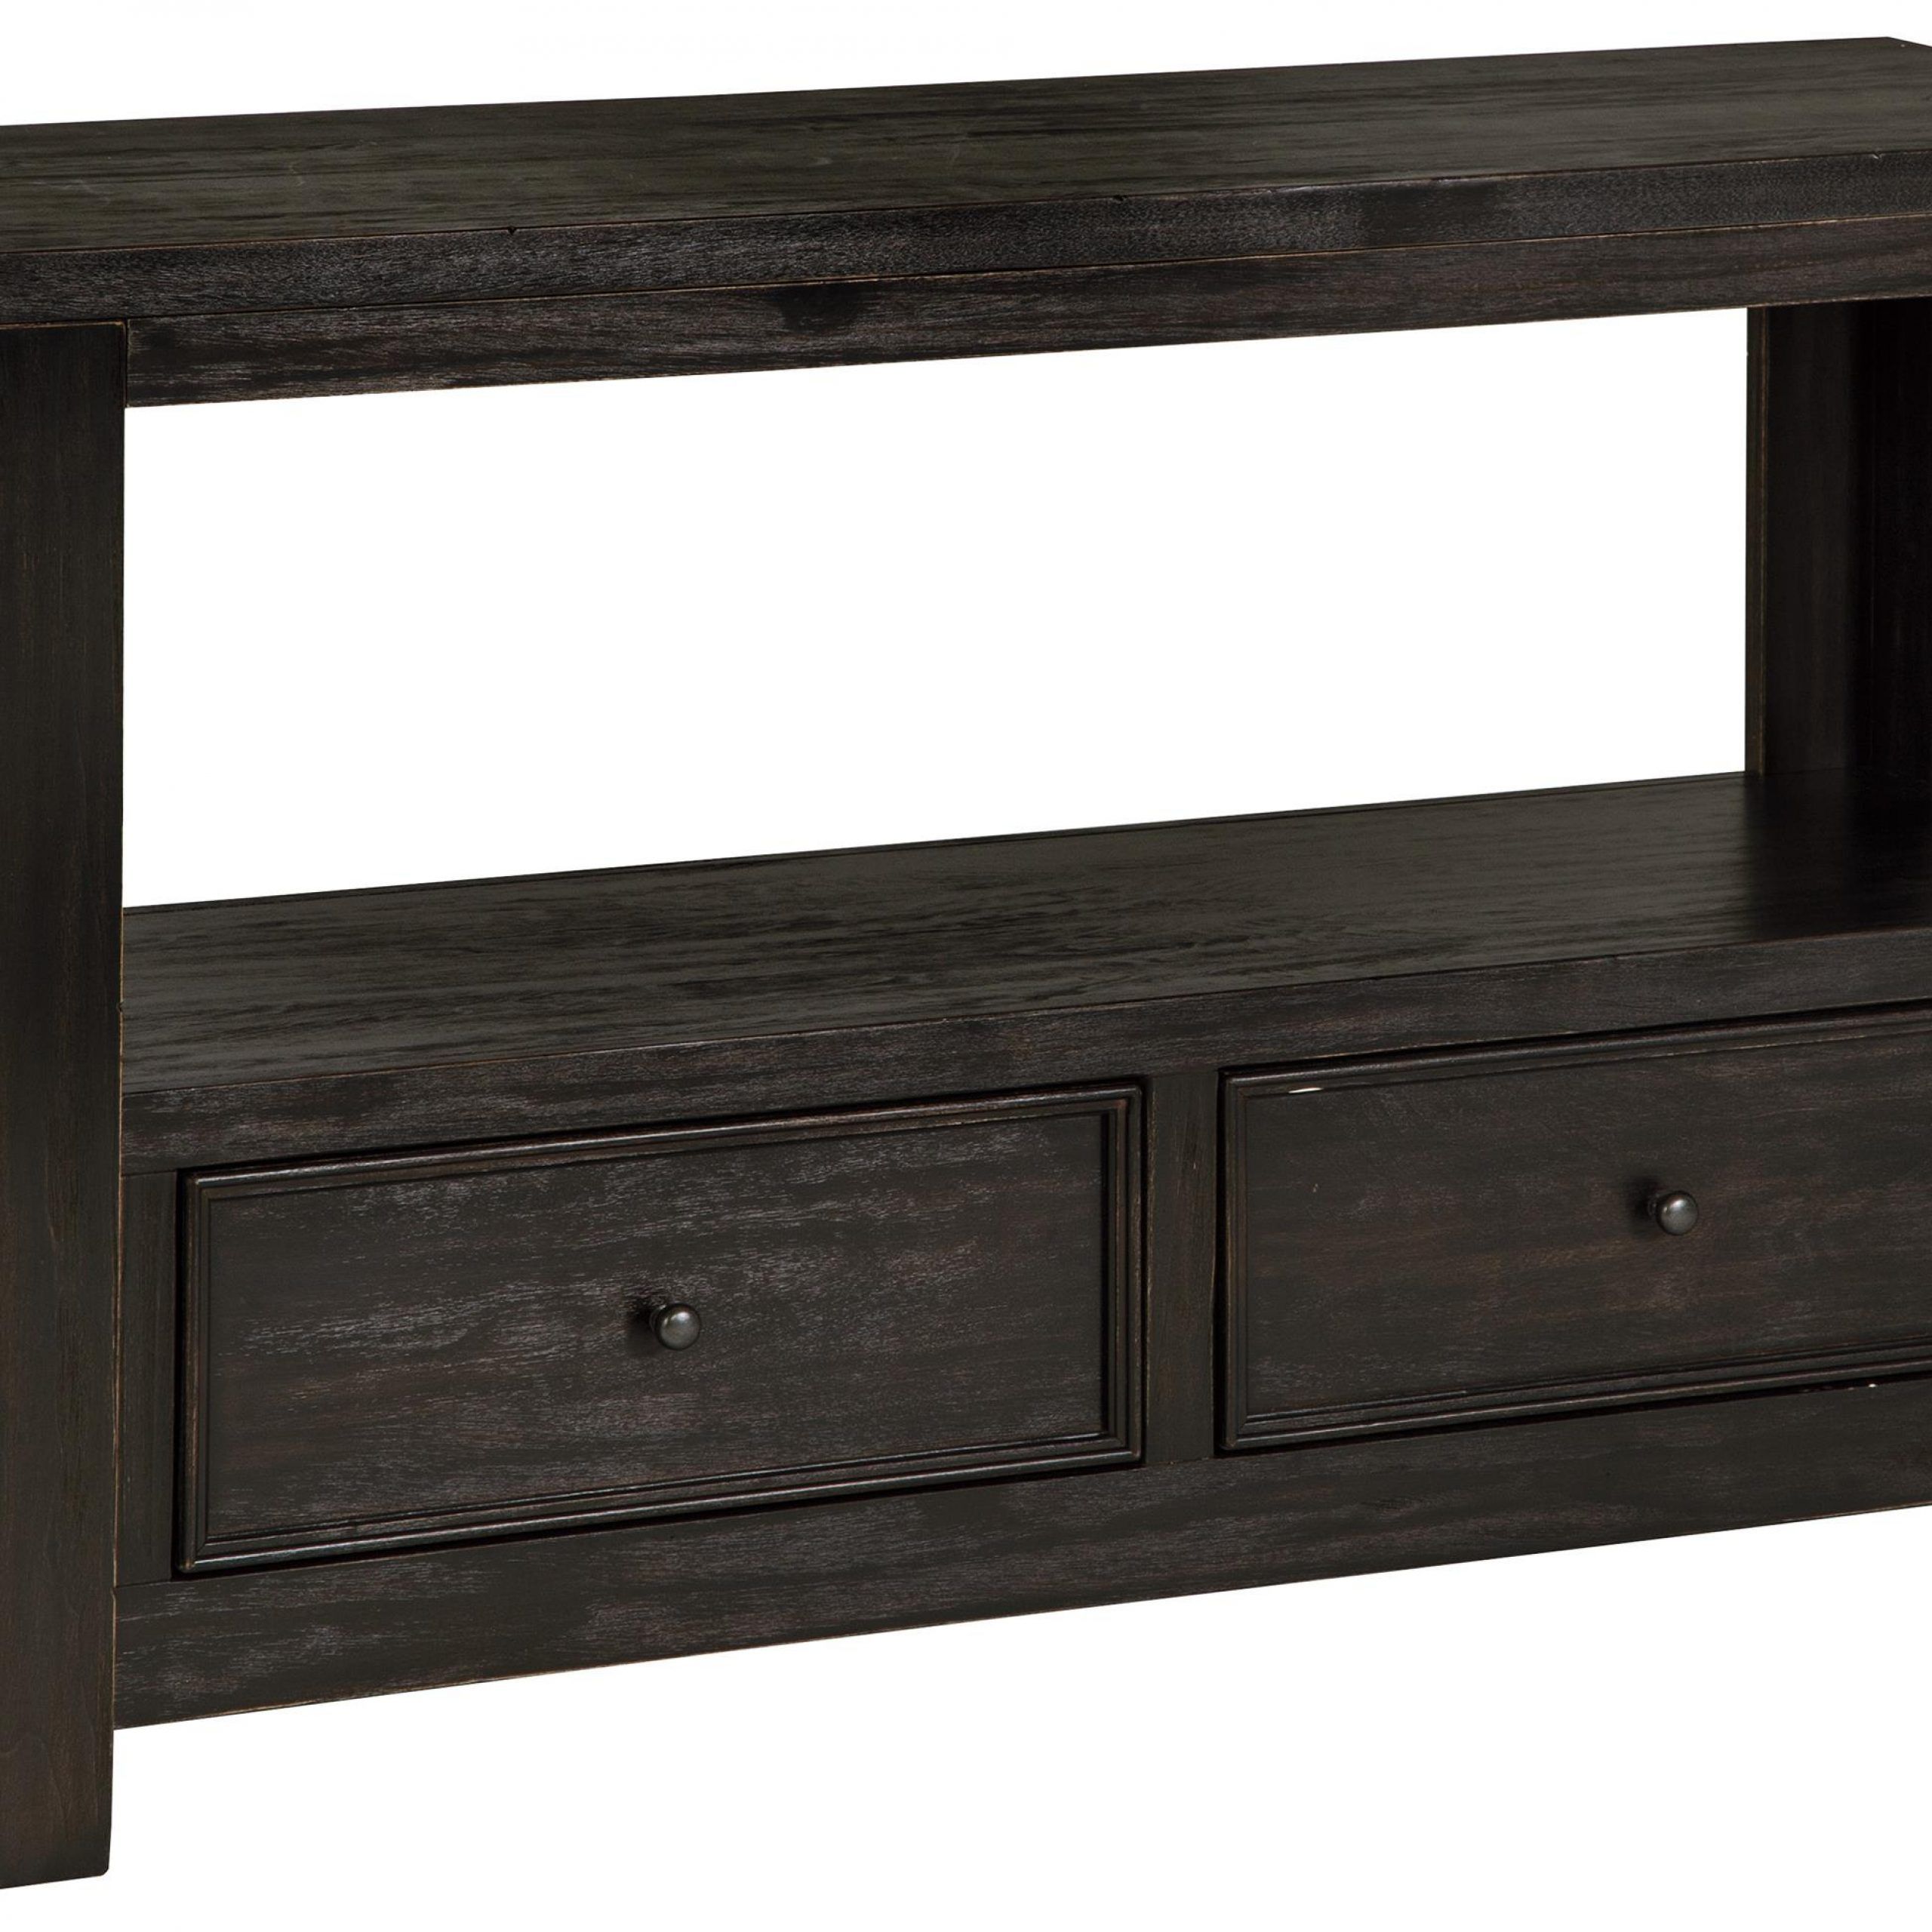 Signature Designashley Gavelston Rustic Distressed Black Sofa Table Within Rustic Oak And Black Console Tables (View 17 of 20)